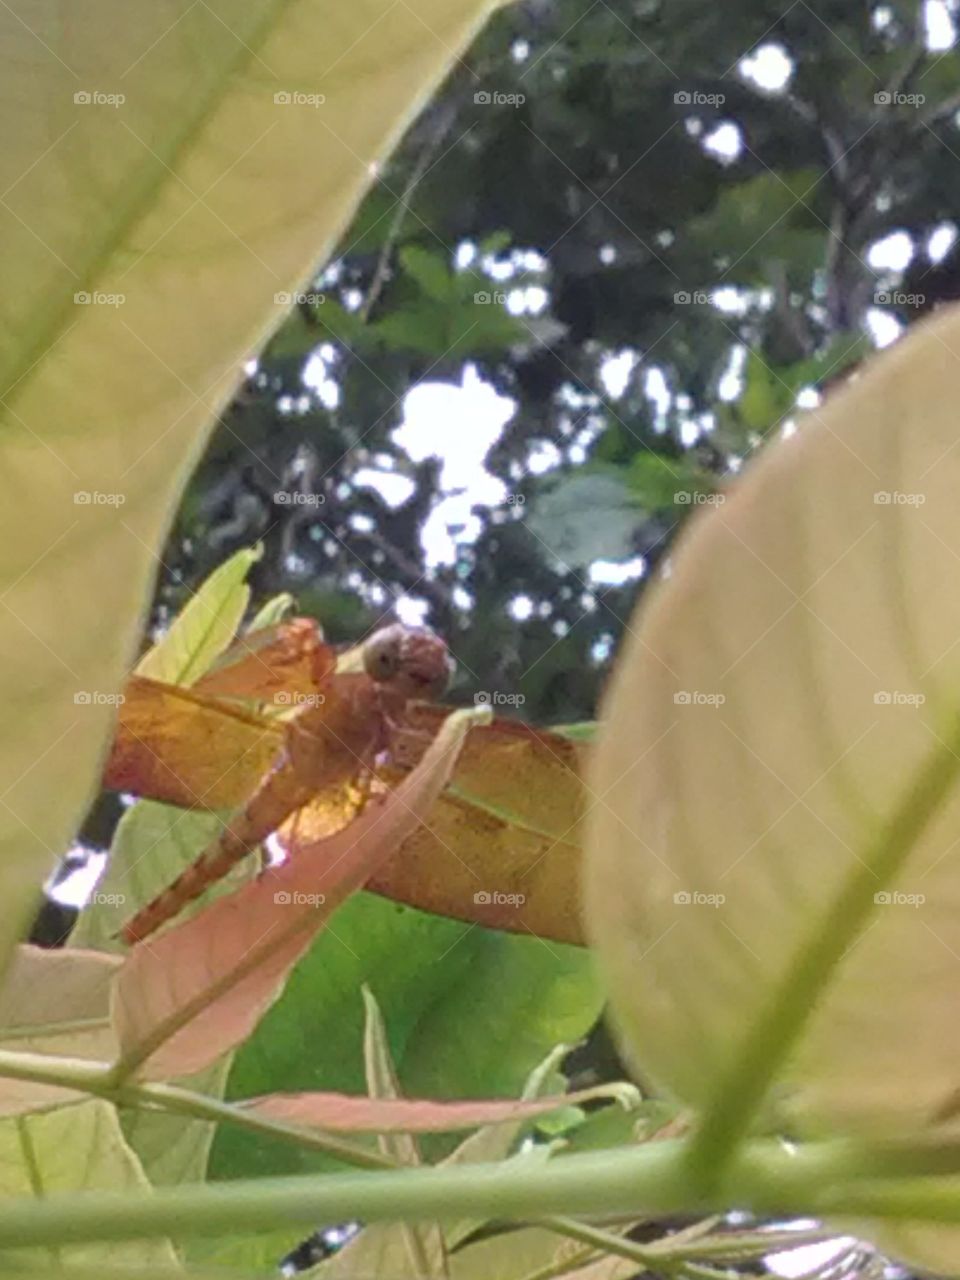 The beautiful dragonfly is sit on the leafs.